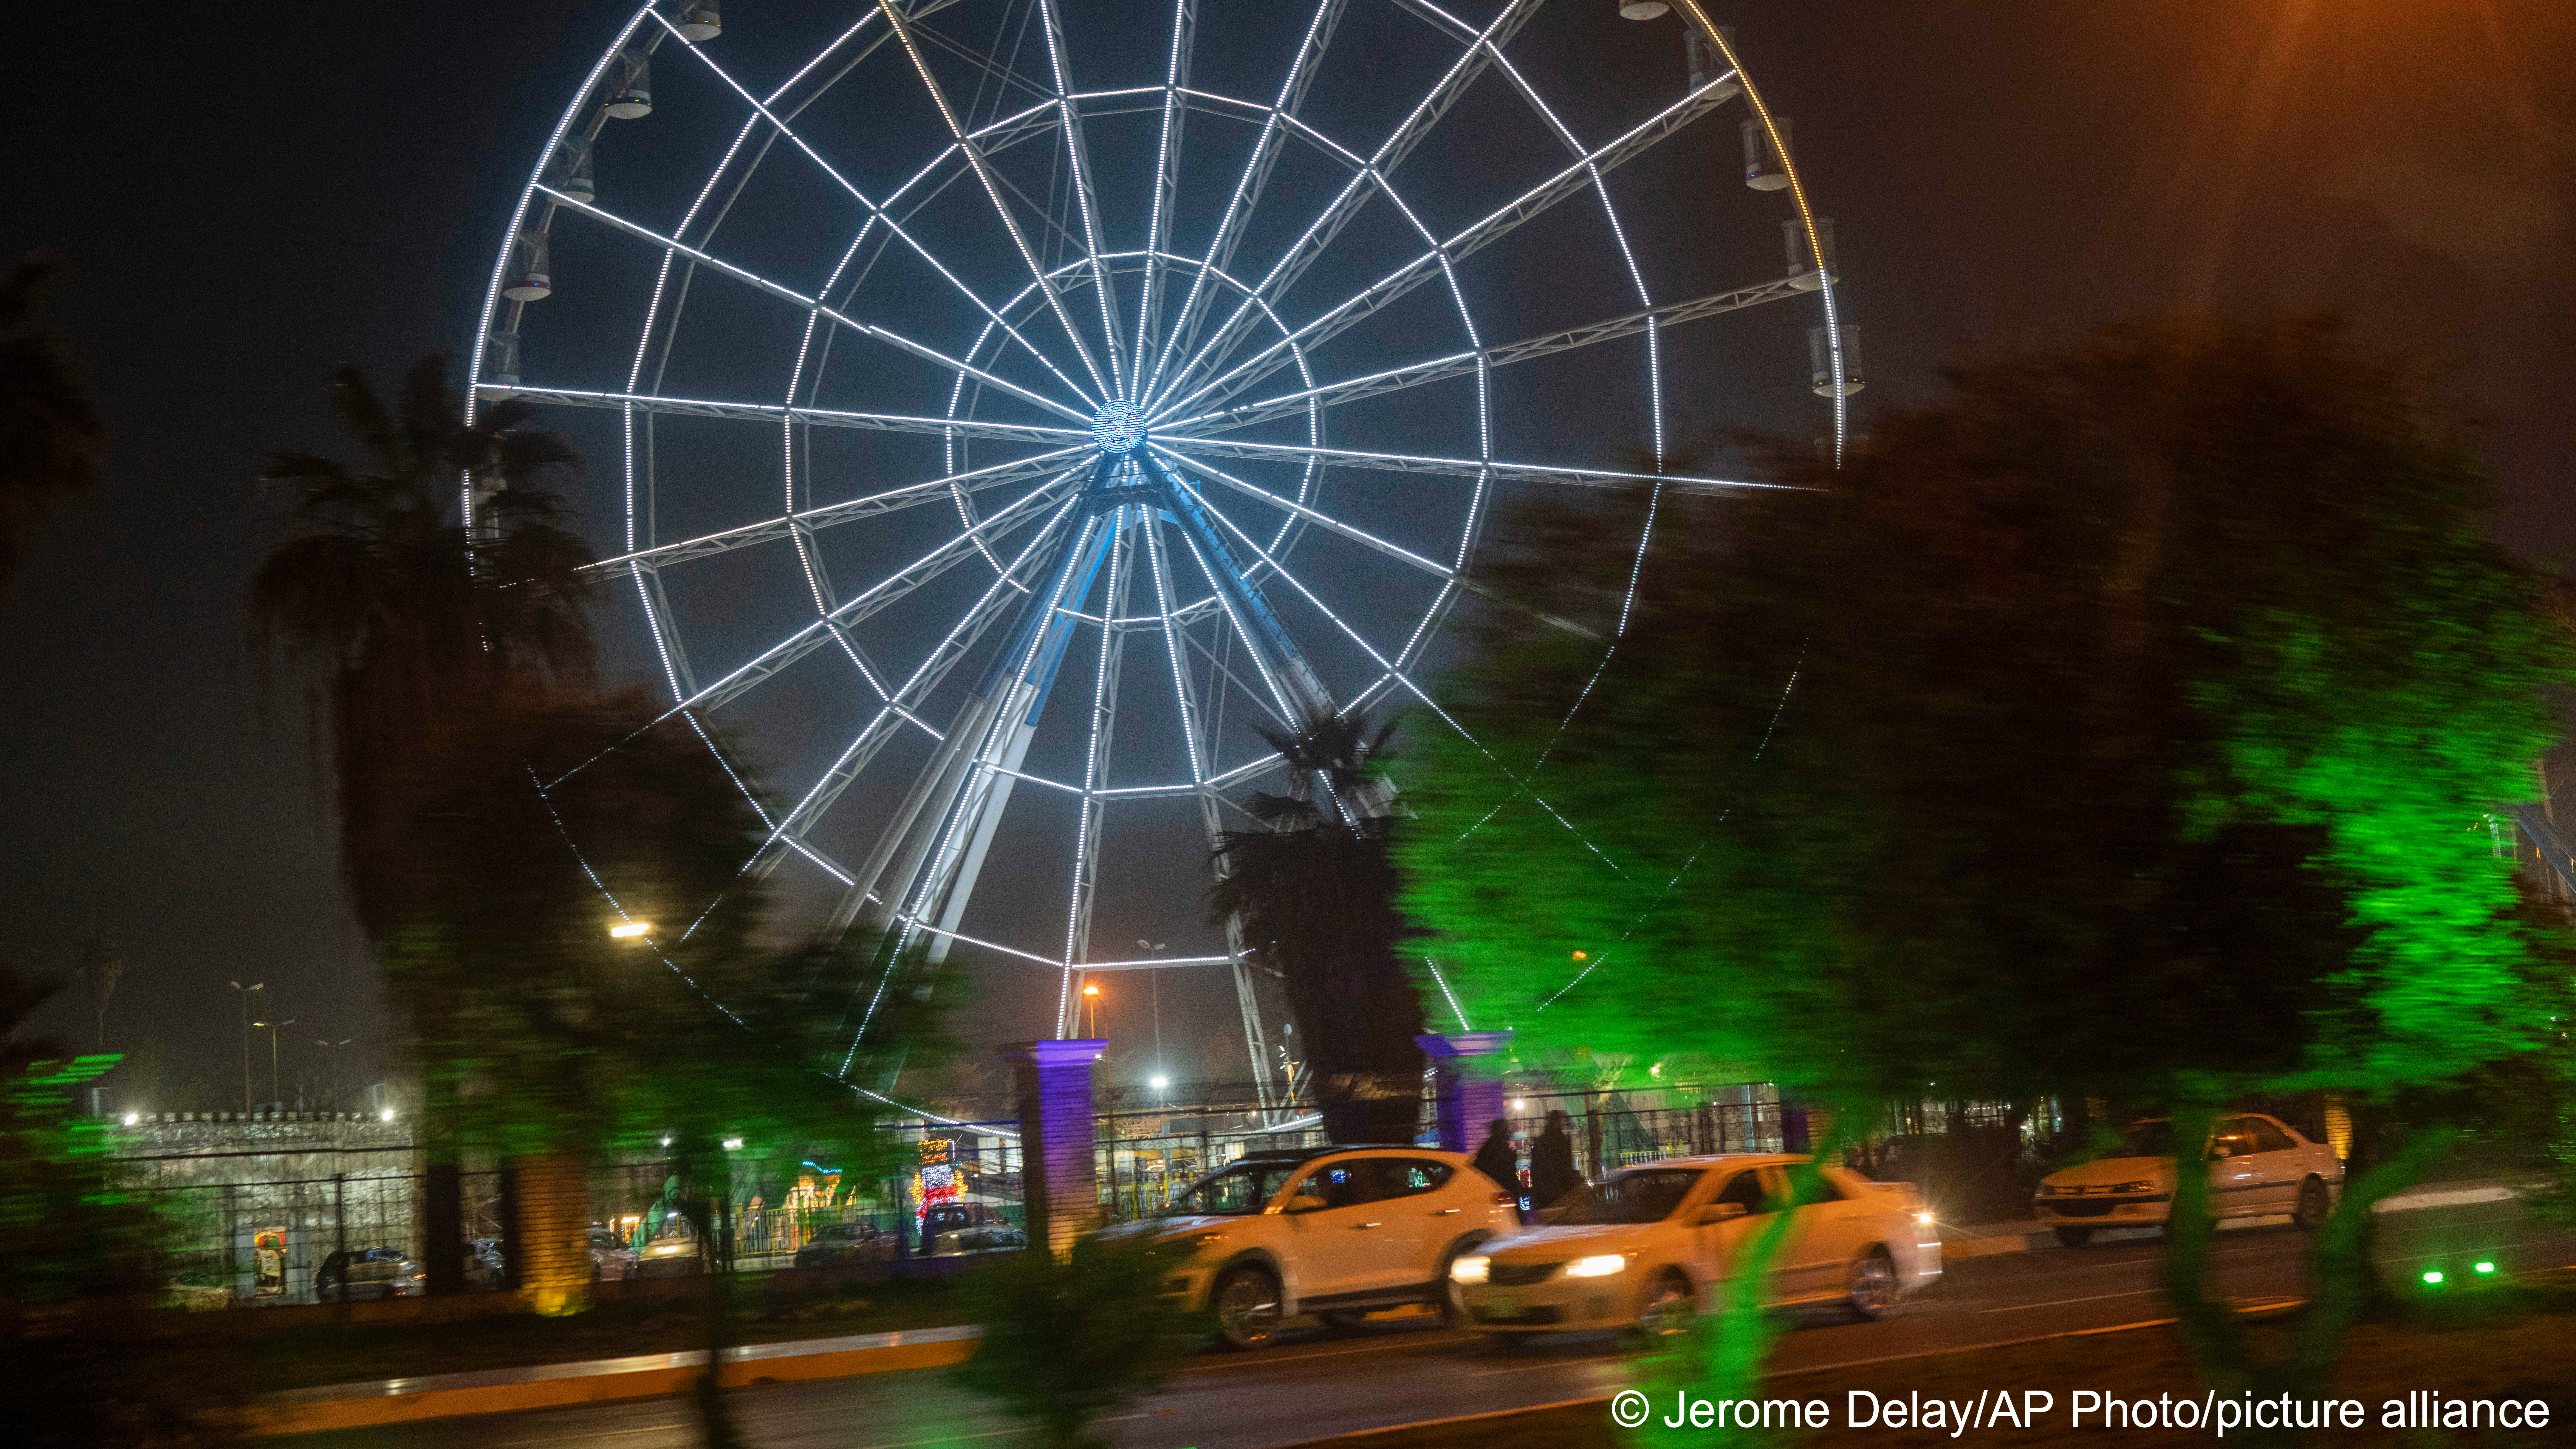 The ferris wheel of Baghdad’s Alzawraa amusement park shines in the night  in Baghdad, Iraq, Friday, Feb. 24, 2023. Two decades after a U.S.-led  invasion, Iraq’s capital today is full of life and a sense of renewal, its  residents enjoying a hopeful, peaceful interlude in a painful modern history (image: AP Photo/Jerome Delay)